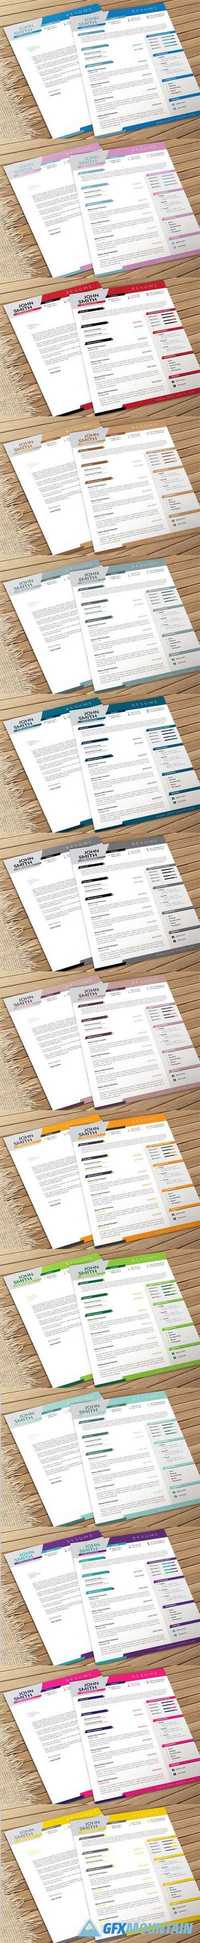 Dynamic CV-Resume and Cover Letter 601966